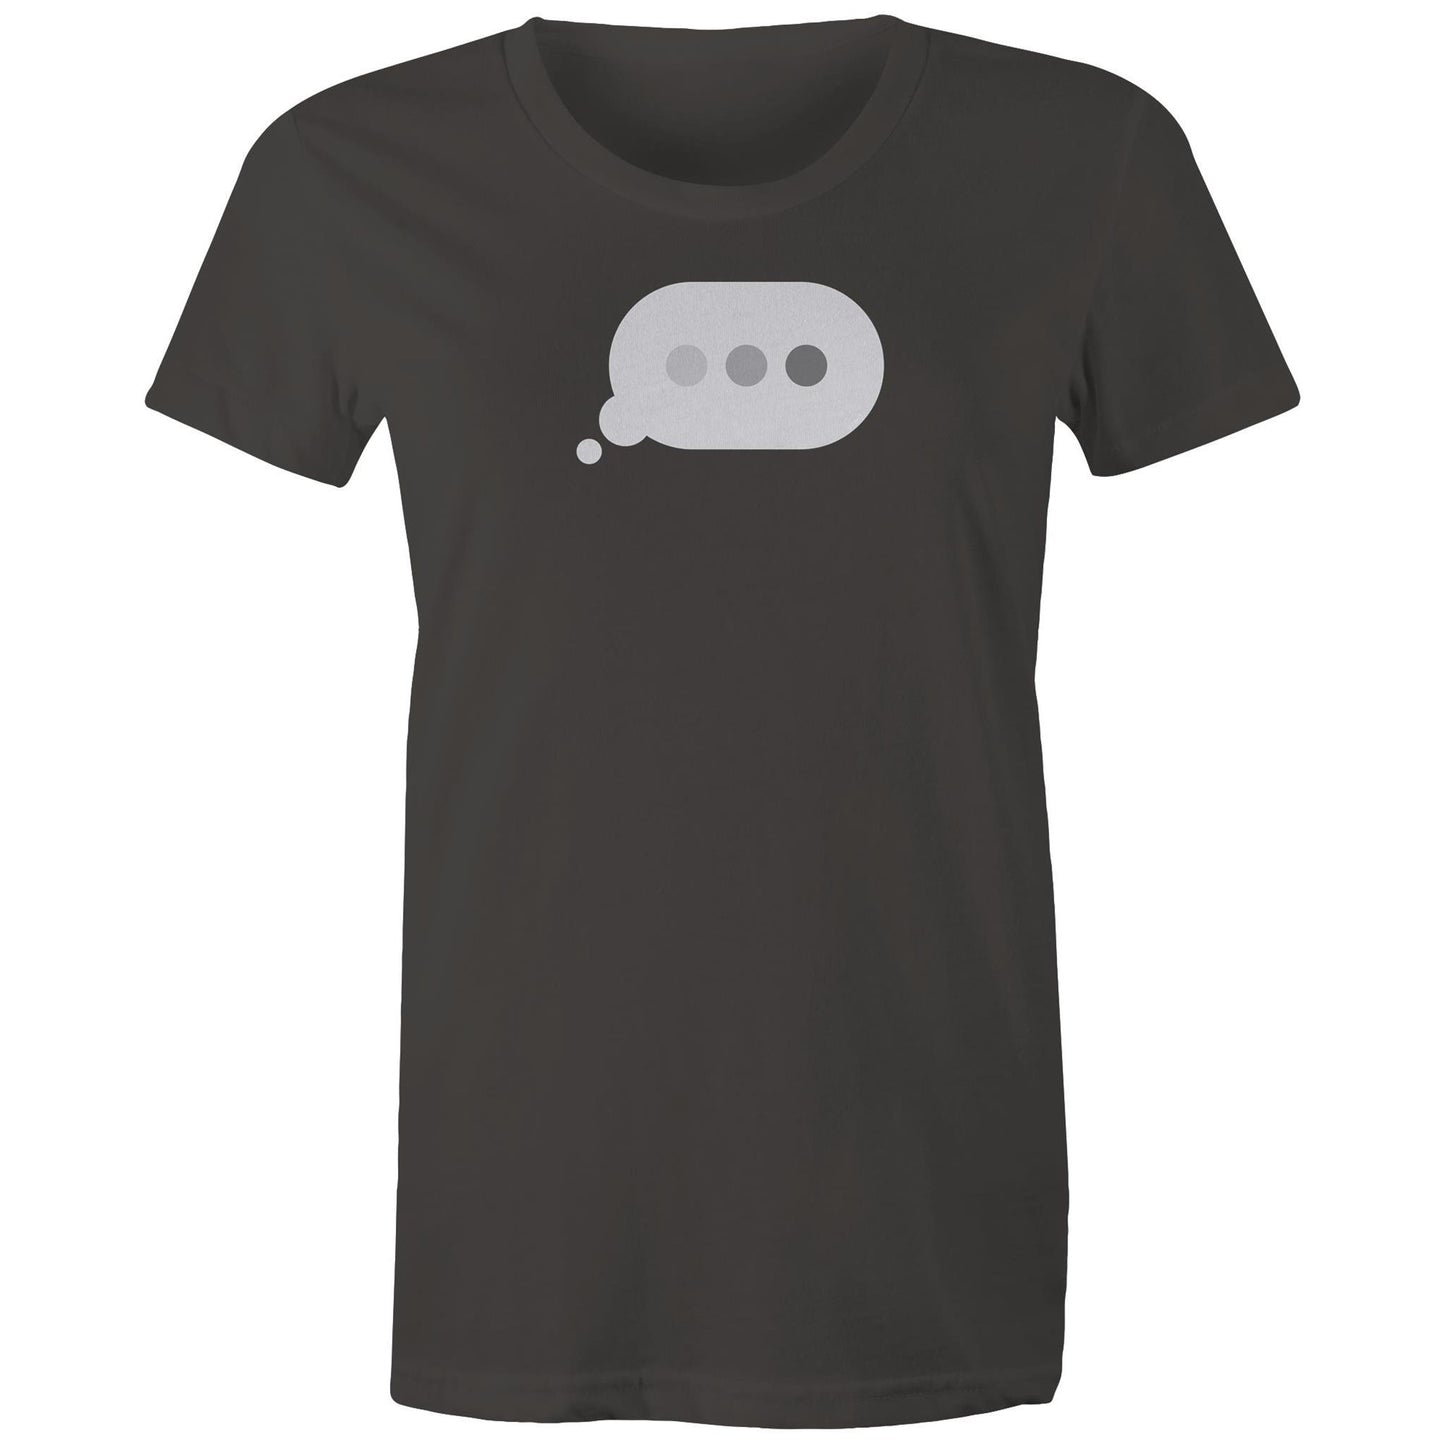 Typing Indicator T Shirts for Women